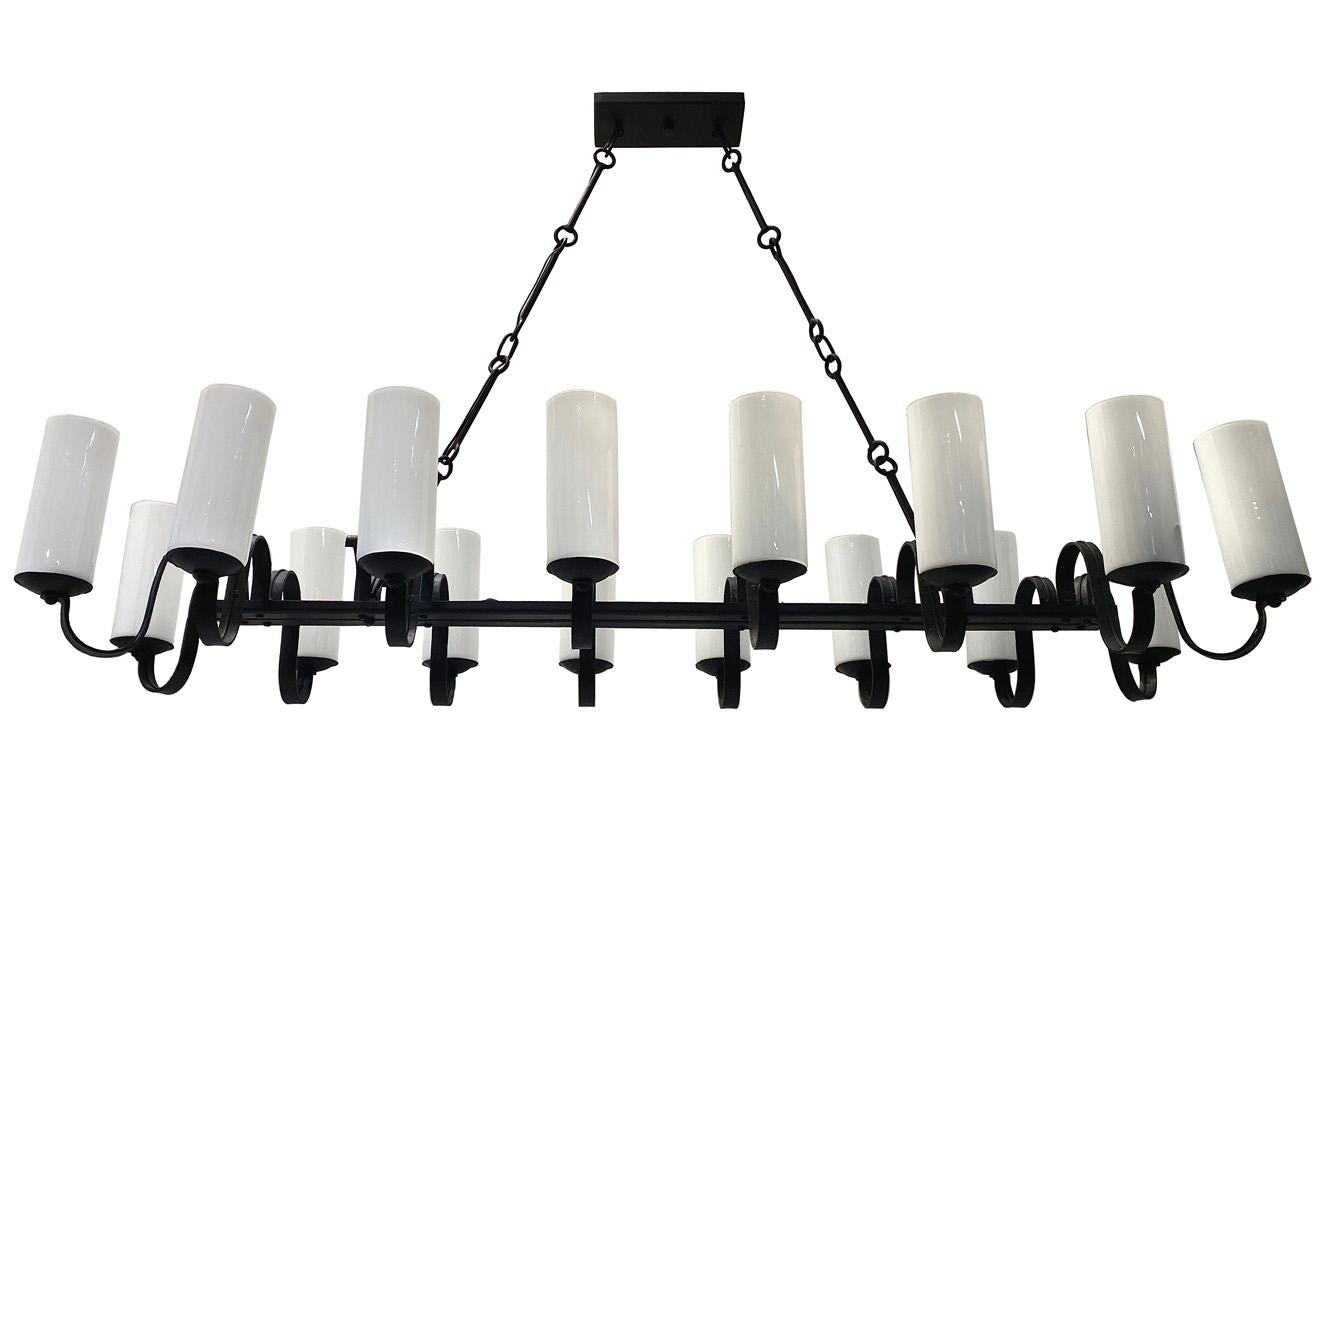 A circa 1920s Italian wrought iron chandelier with 16-light and milk glass shades.

Measurements:
Height 32.5